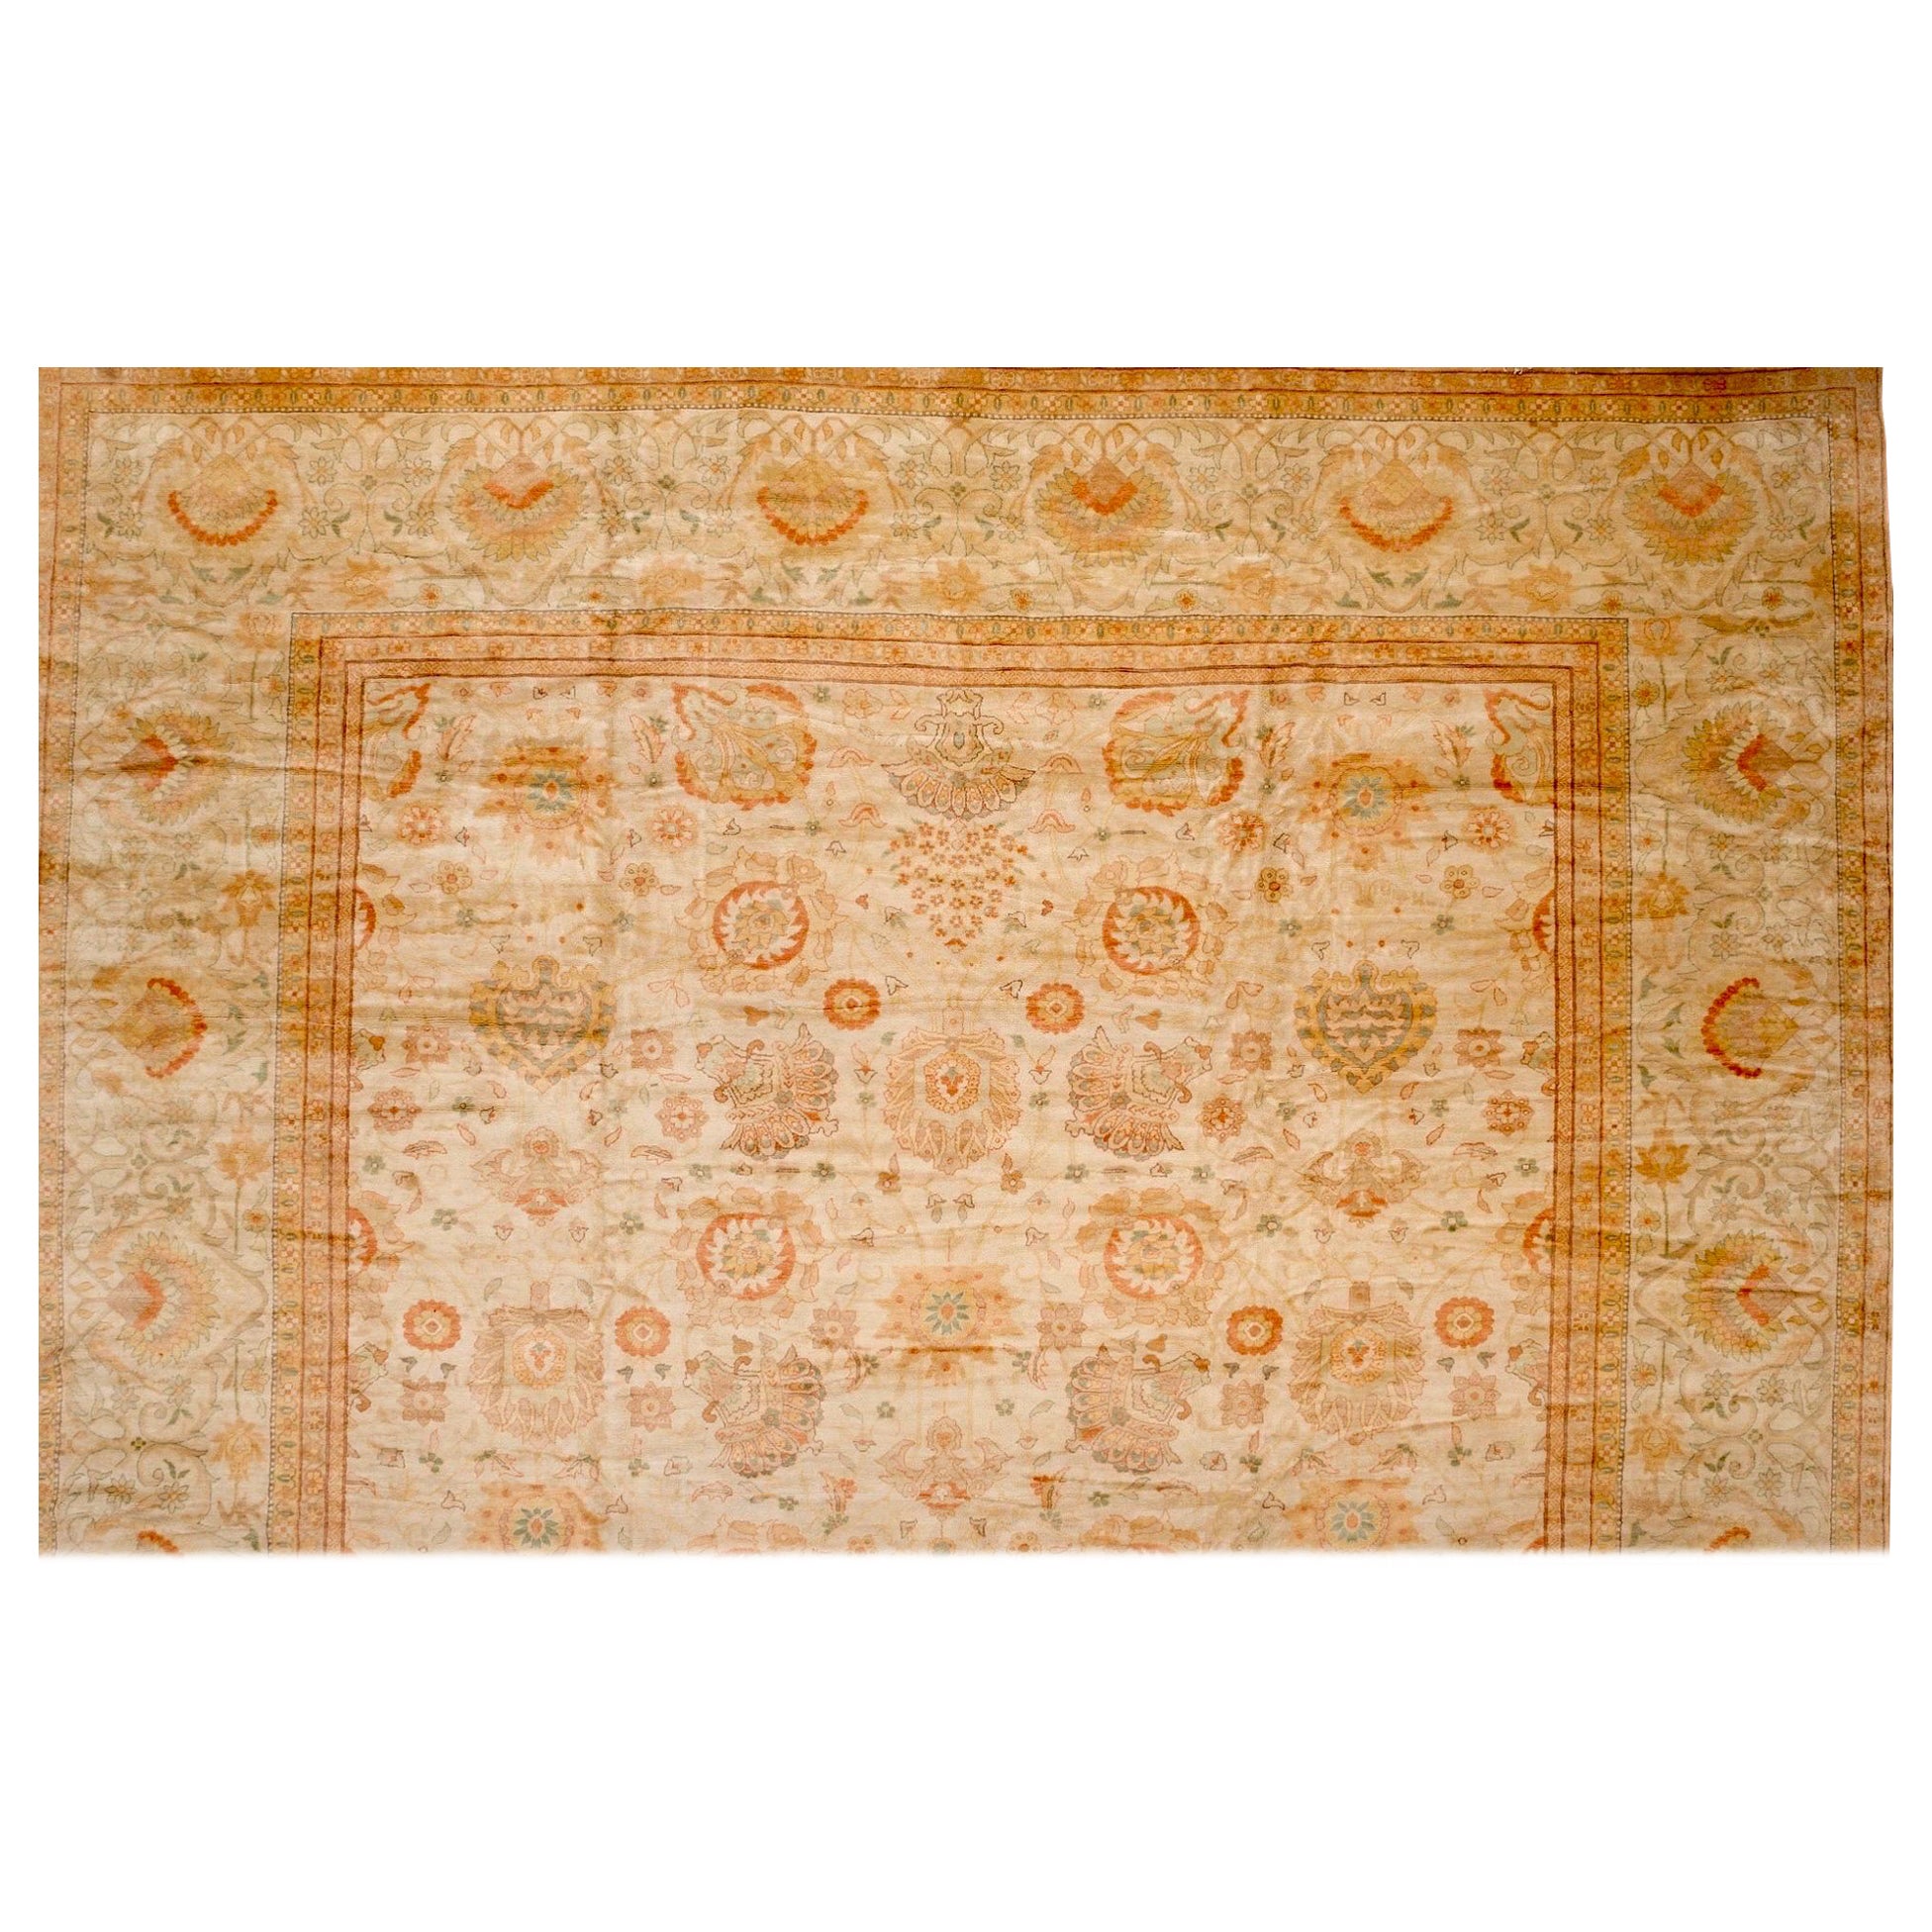 OVERSIZE Mansion Size Beige Ivory Persian Sultanabad Style Rug 18.7 x 39.8 ft 